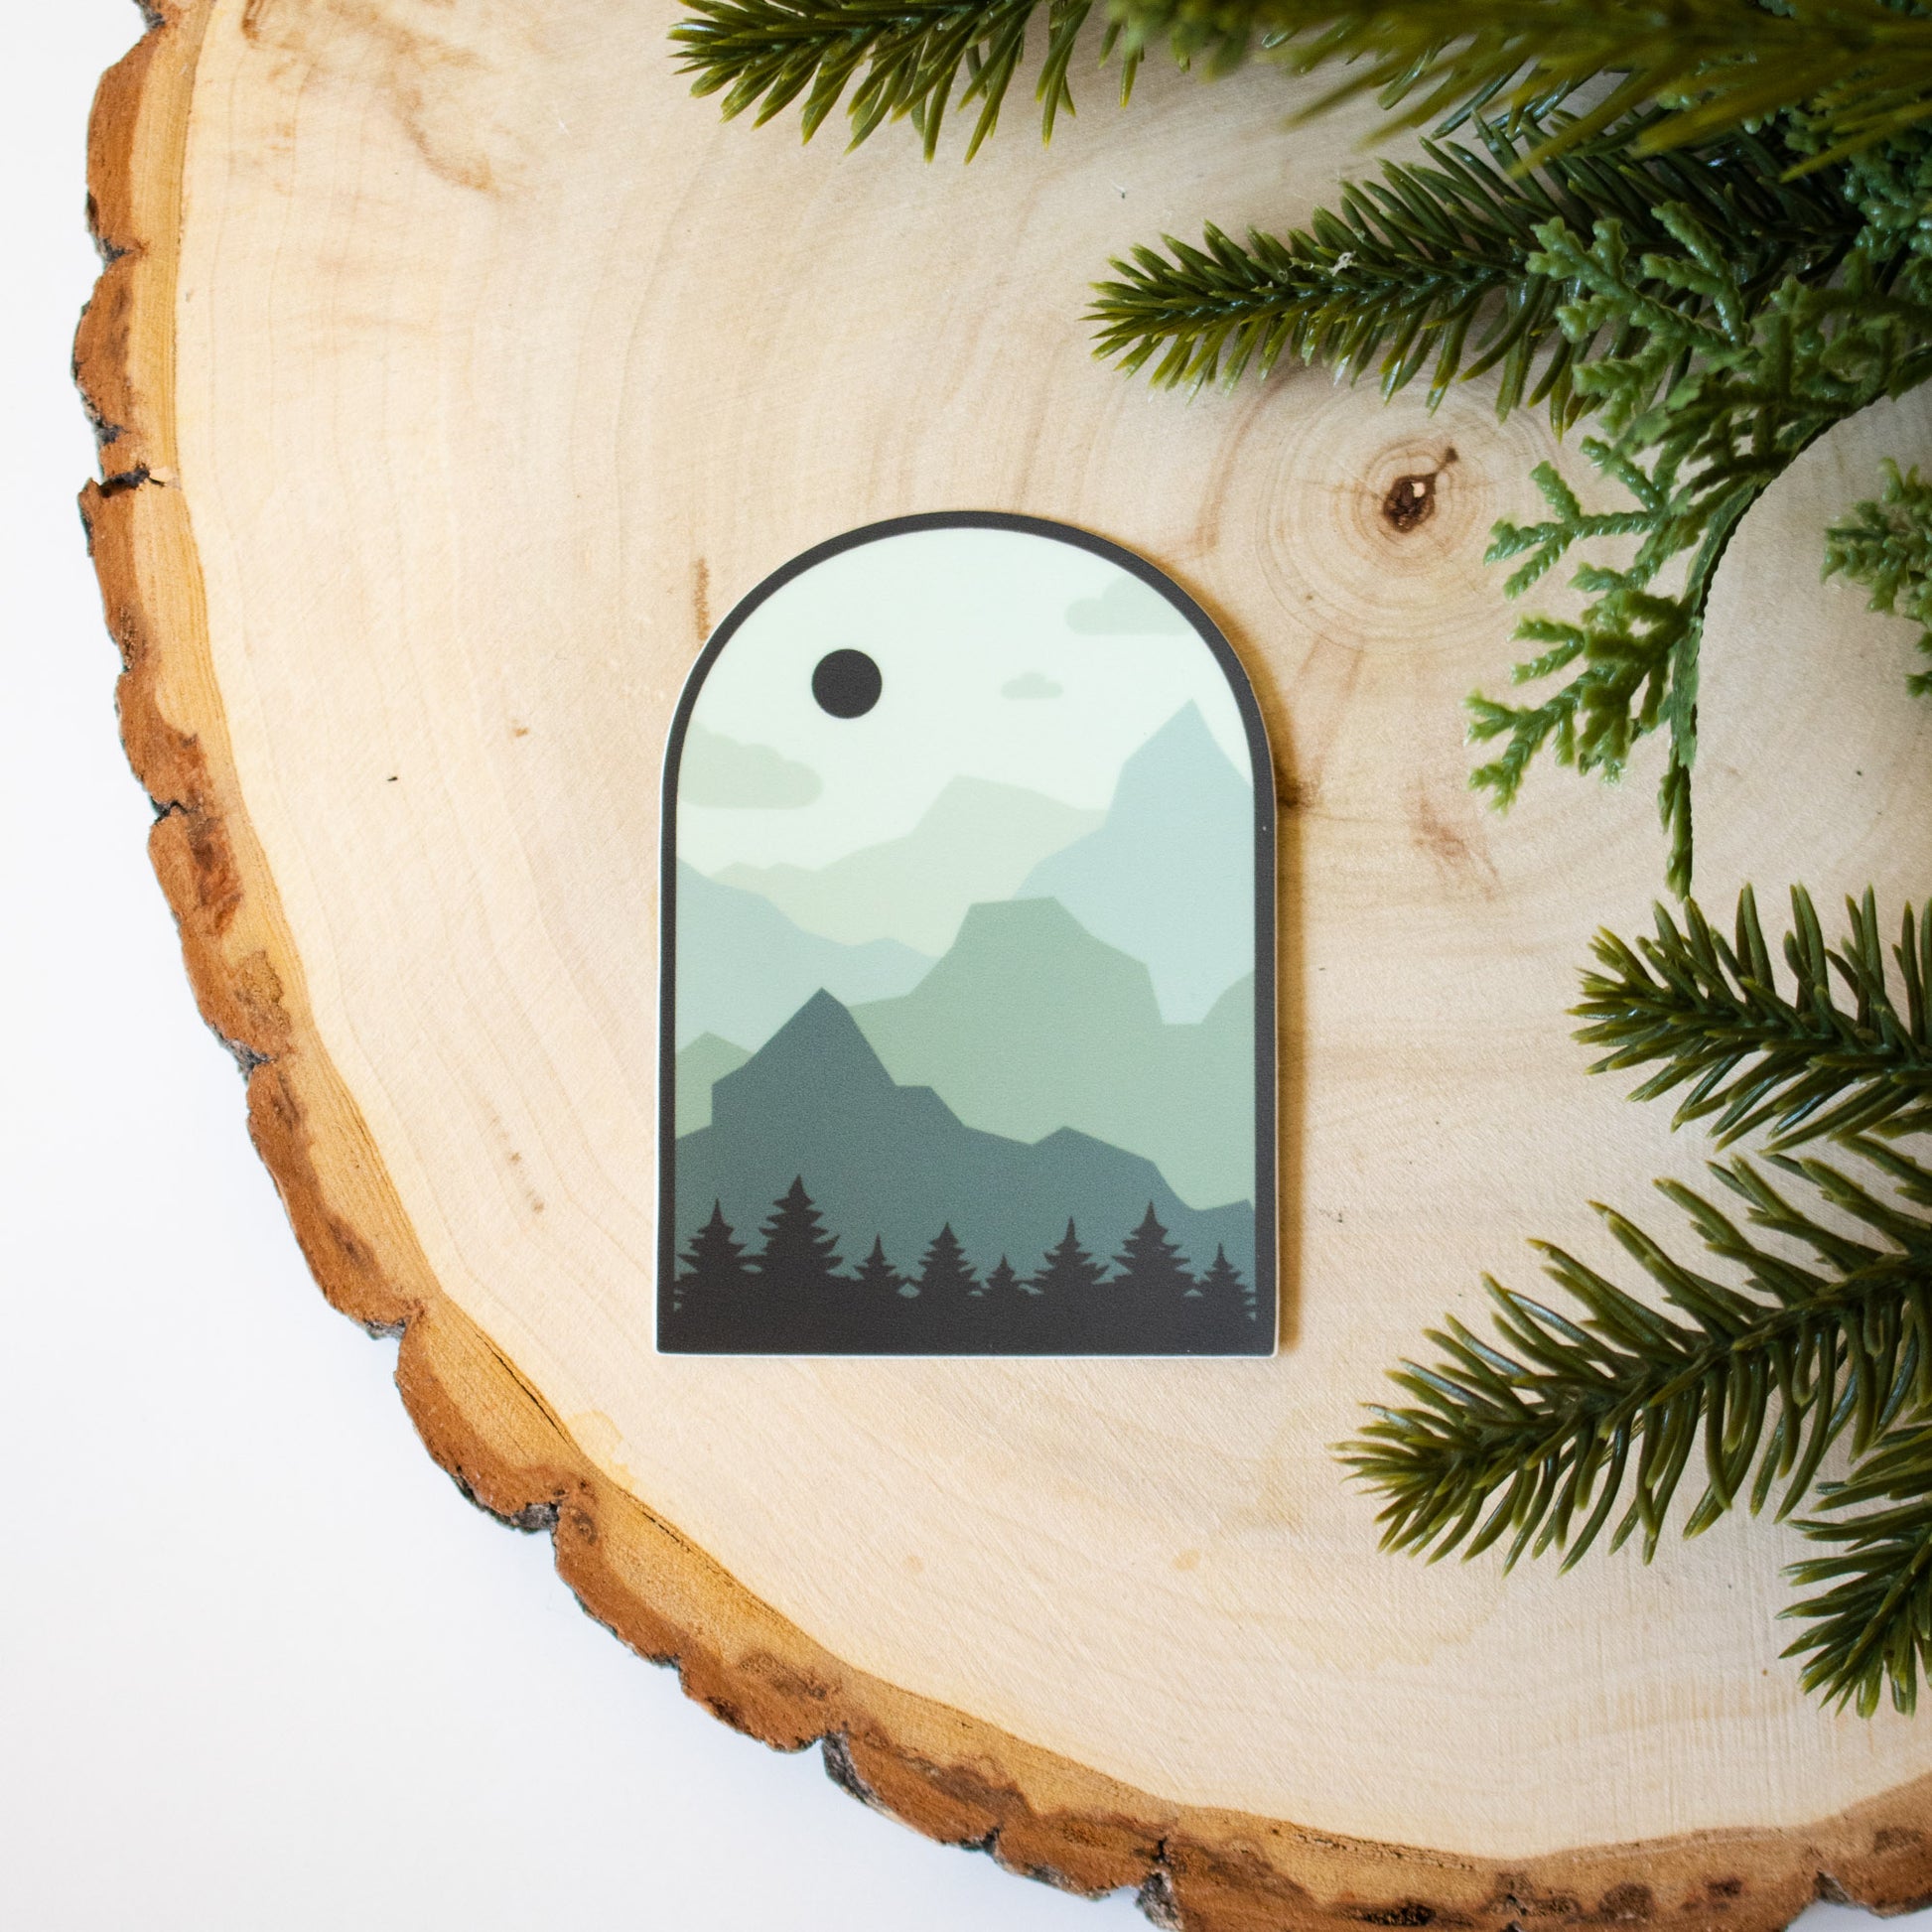 Mountain silhouette design in varying shades of a forest green 